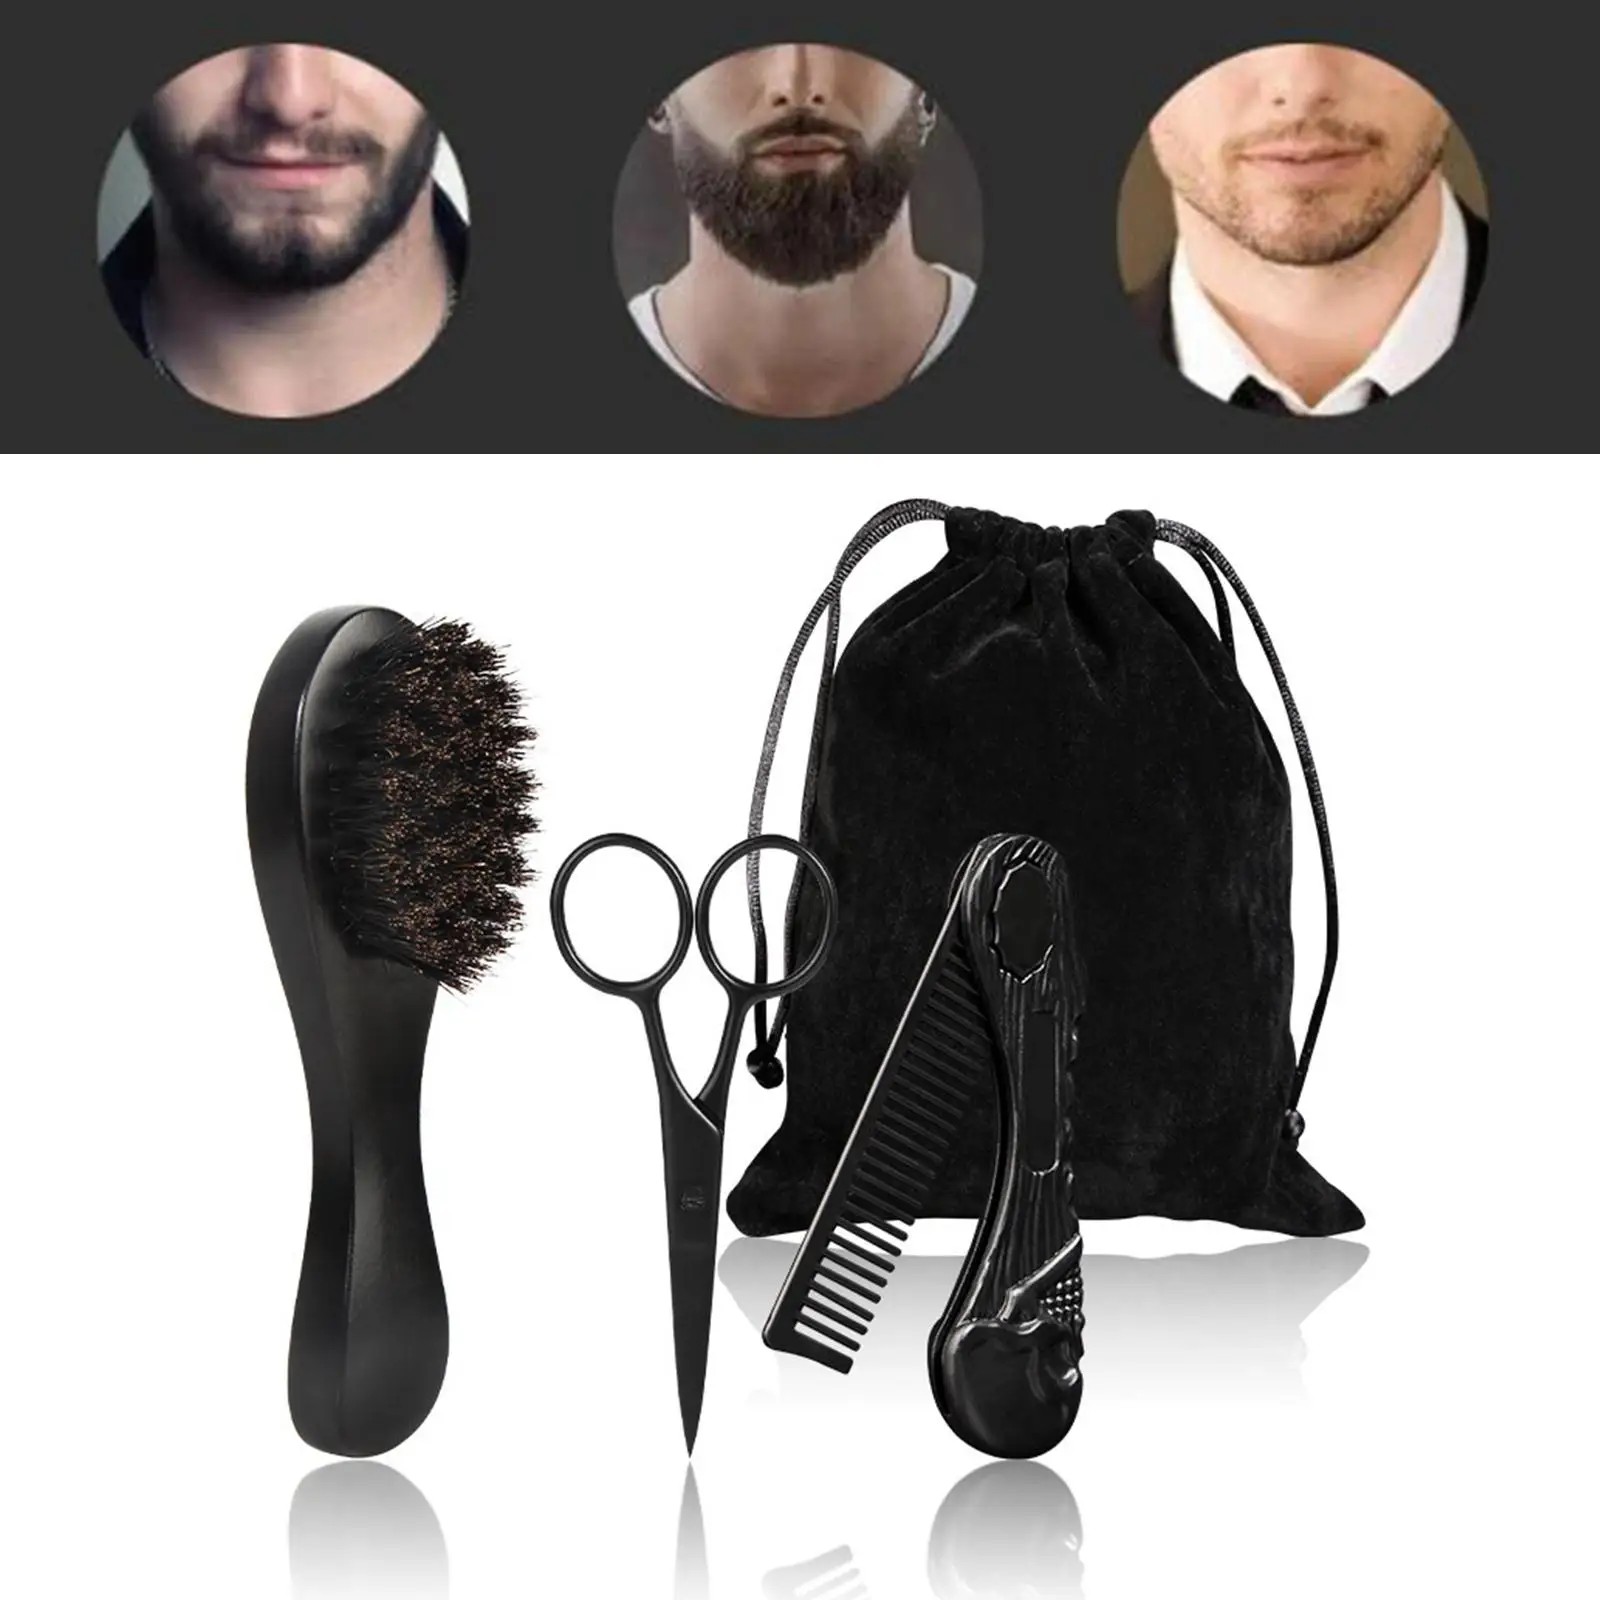 3x Professional Men Beard Care Kit Gift Wooden Comb Brush with Dustproof Bag for Men`s Travel Home Cleaning Grooming Tool